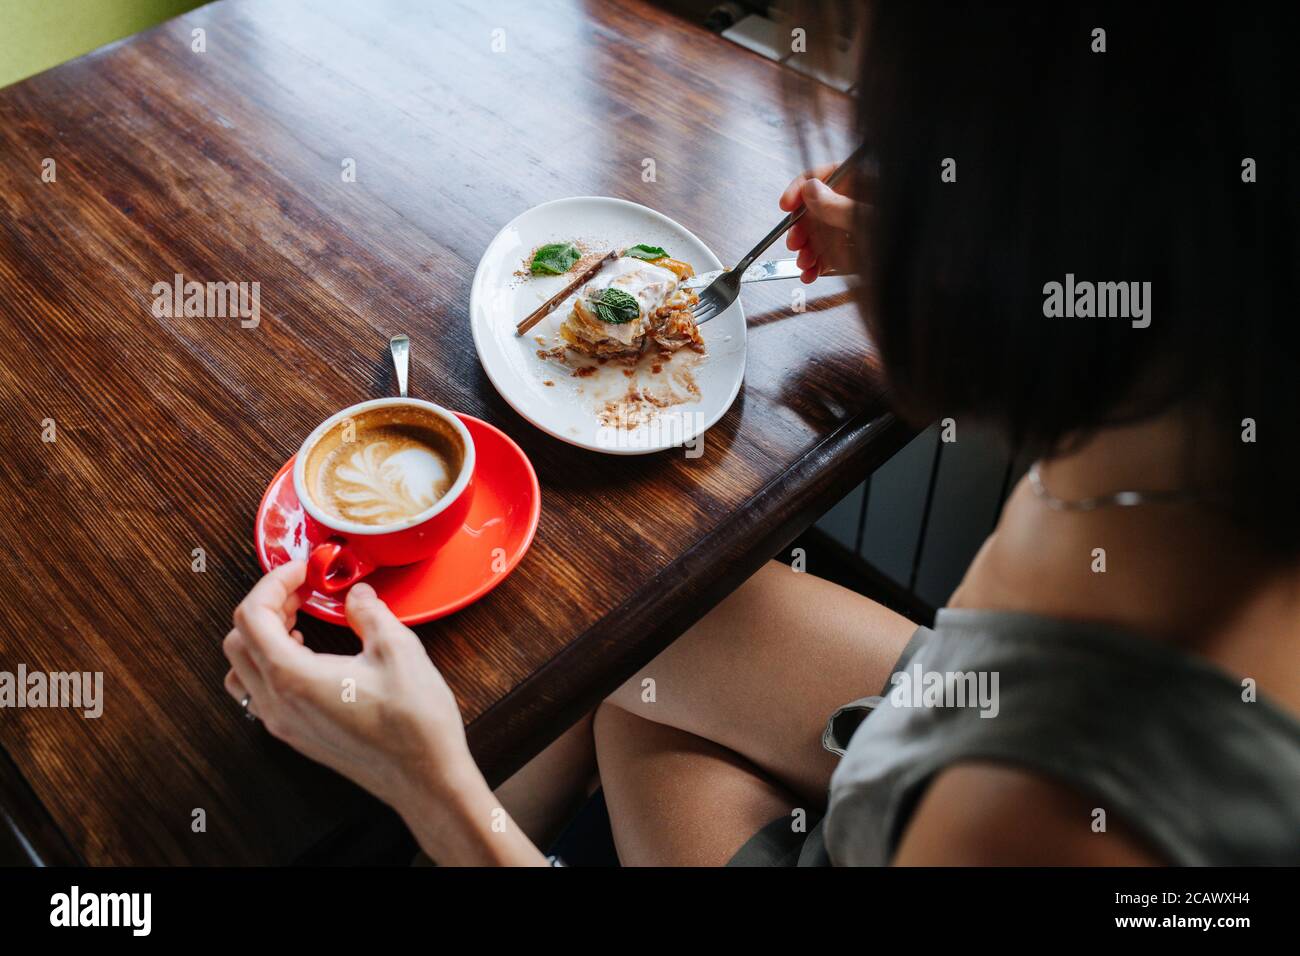 Over a shoulder view of a woman drinking coffee and eating cake in a cafe. Stock Photo